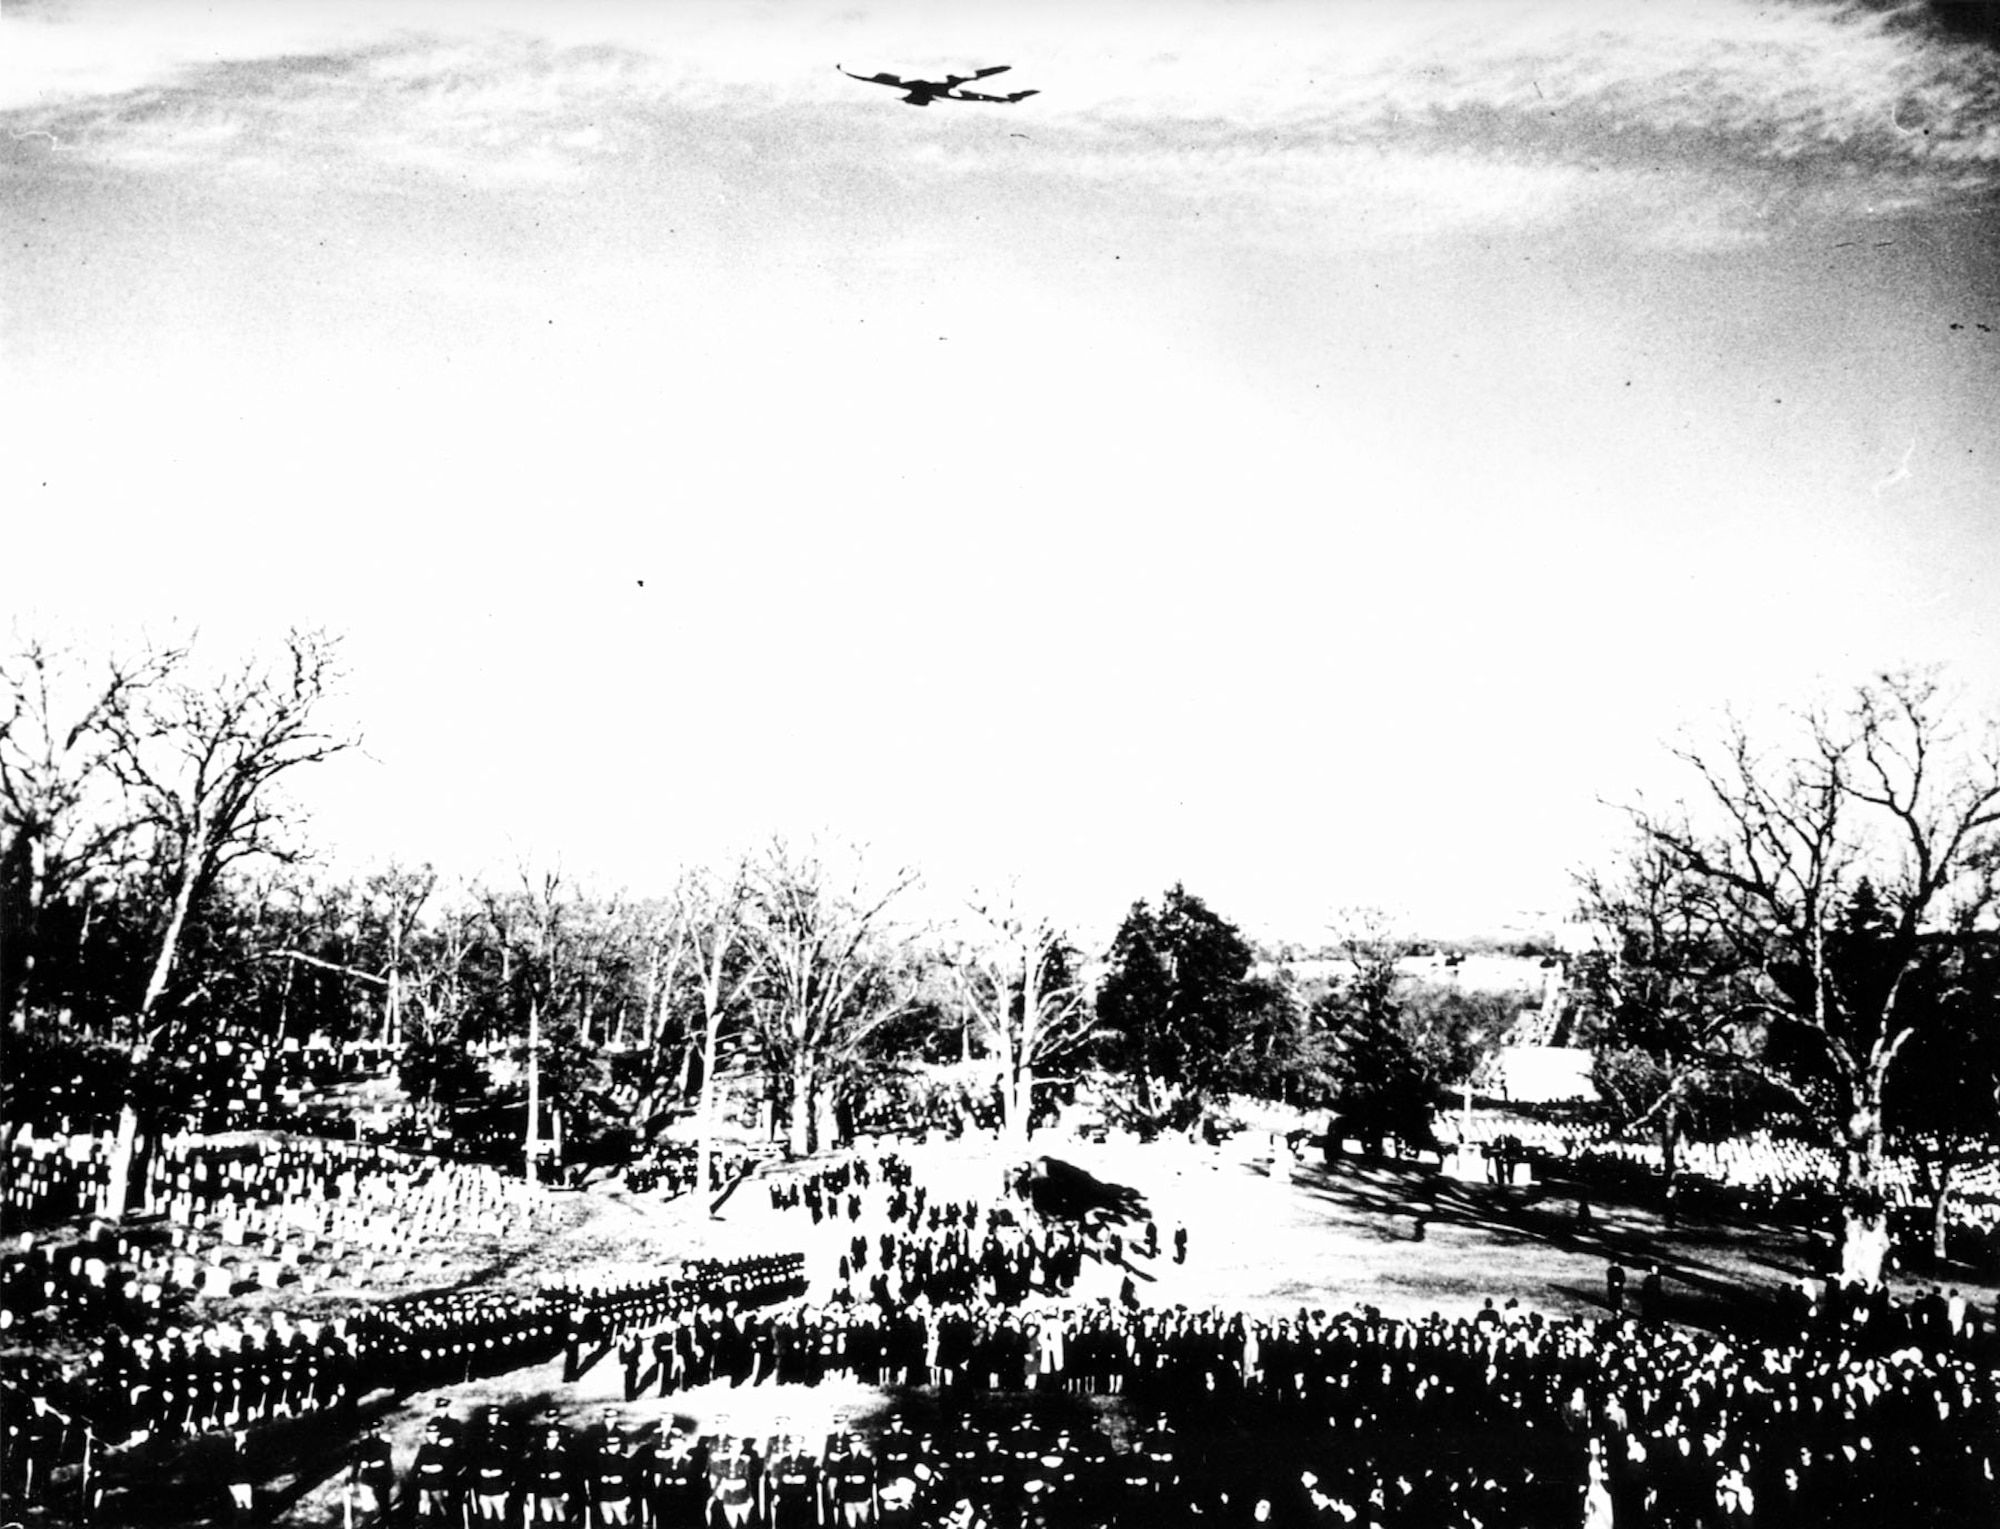 Boeing VC-137C SAM 26000 (Air Force One) flies over President John F. Kennedy's funeral in 1963. (U.S. Air Force photo)